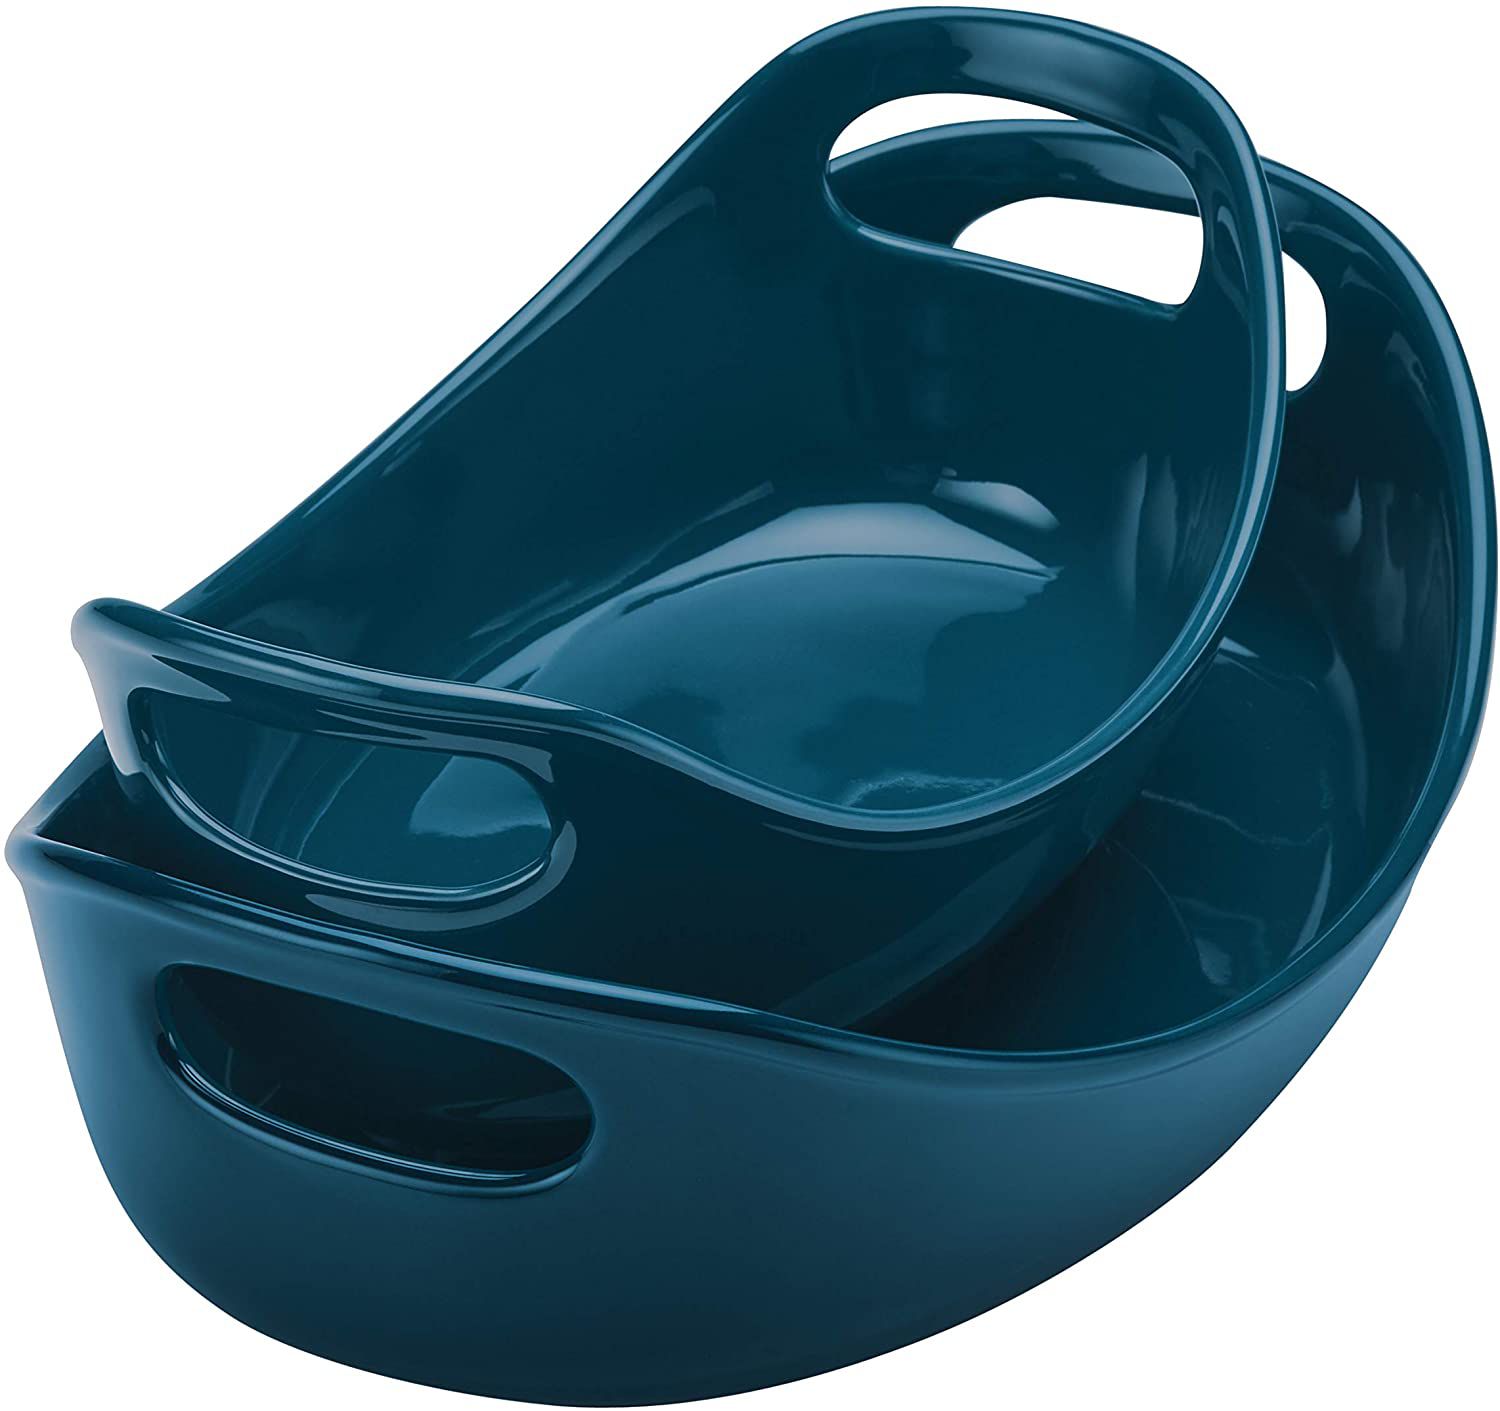 Rachael Ray Ceramics Bubble and Brown Oval Baker Set, 2-Piece, Marine Blue